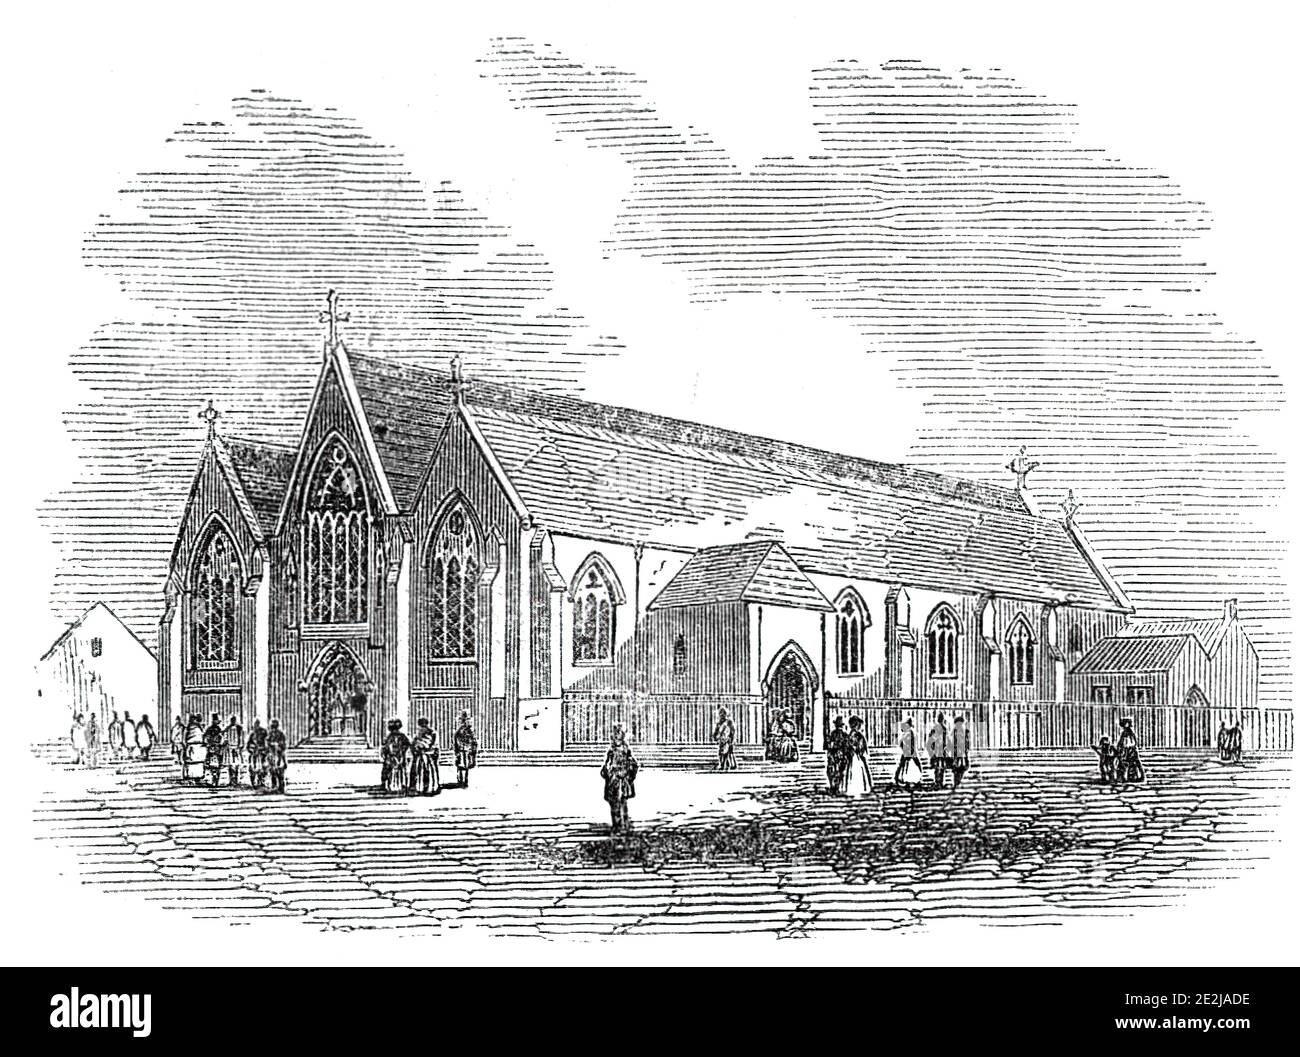 New Catholic church at Newcastle, 1844. View of a church '...dedicated to St. Mary, and situated in Clayton-street, Newcastle [in the north of England]...This new ecclesiastical structure is of stone, and presents a close analogy to the pure decorative style'. From &quot;Illustrated London News&quot;, 1844, Vol V. Stock Photo